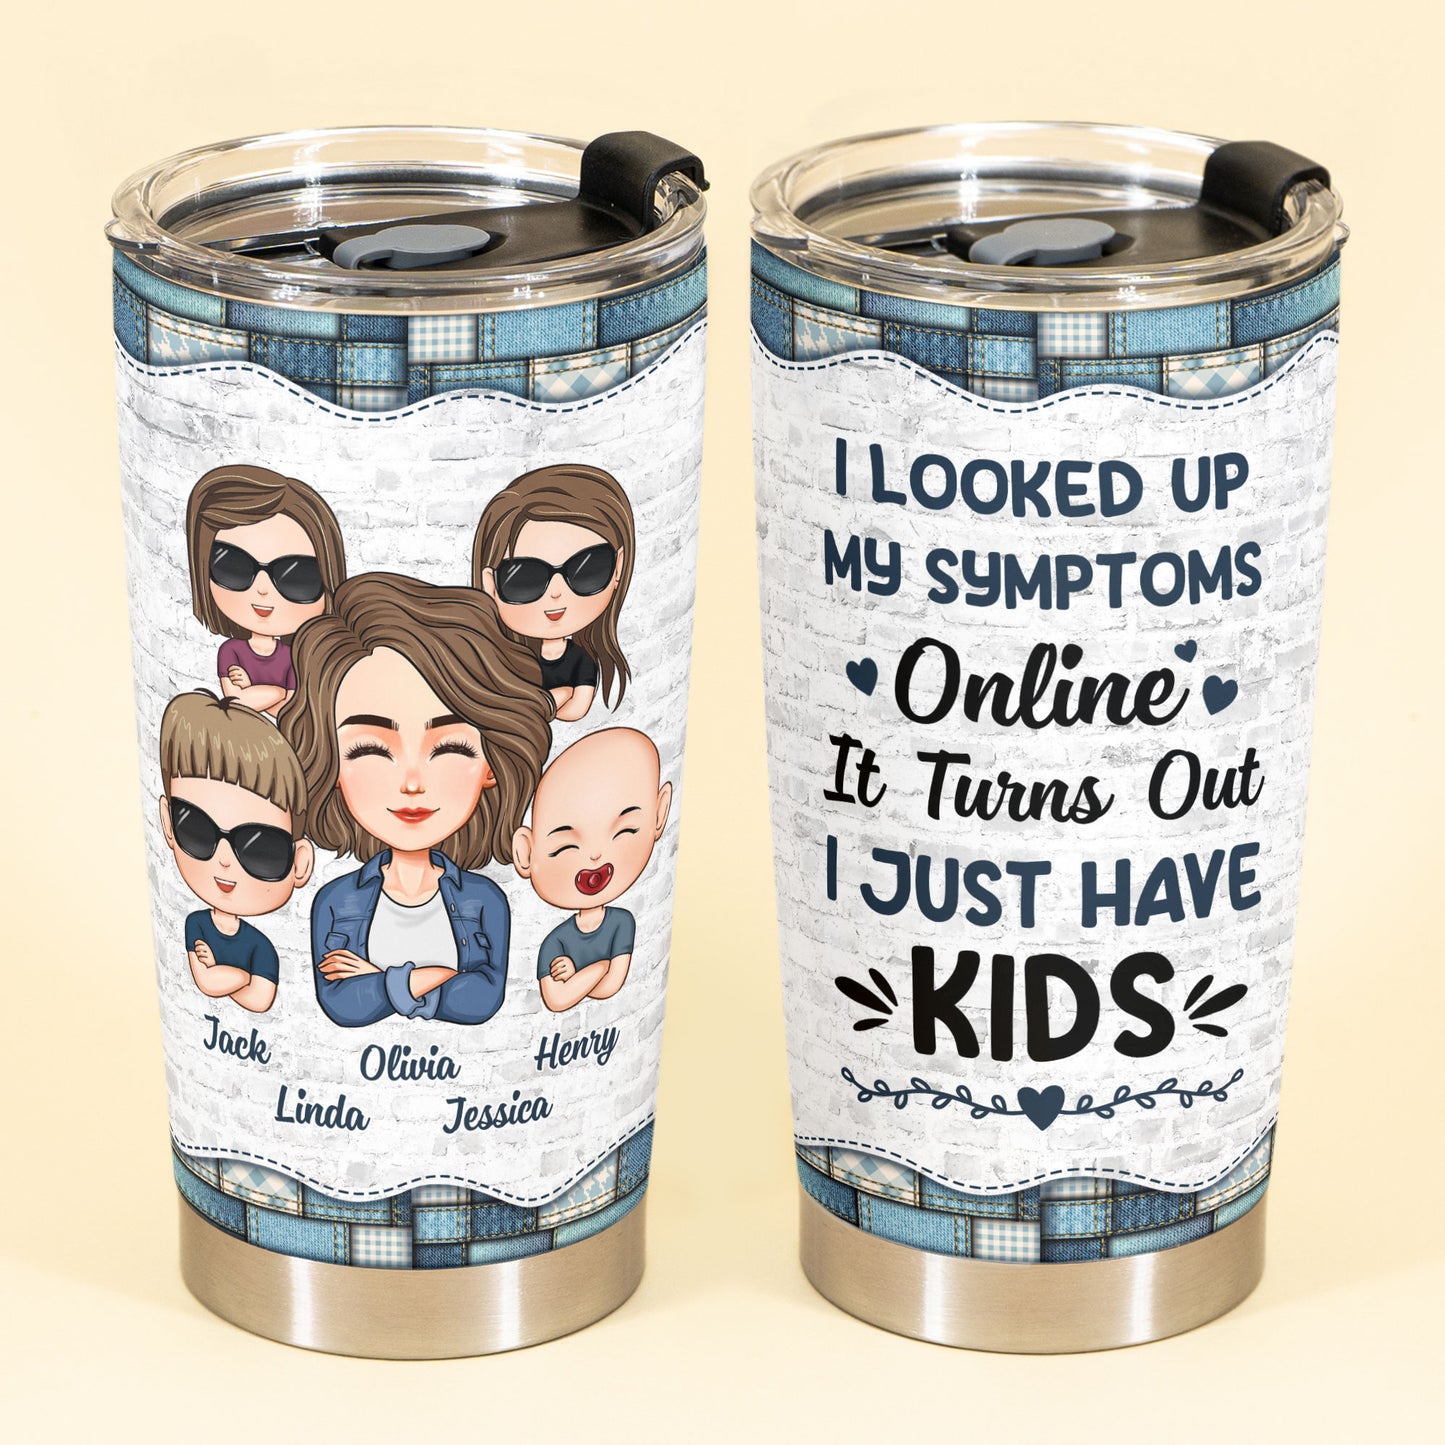 https://macorner.co/cdn/shop/products/Looked-Up-My-Symptoms-Turns-Out-I-Have-Kids-Personalized-Tumbler-Cup-MotherS-Day-Birthday-Loving-Gift-For-Mom-Mother-Mum-From-Daughter-Son-2_f00ad7d1-503f-48f0-b1ba-d9c2eadc5c19.jpg?v=1677064016&width=1445